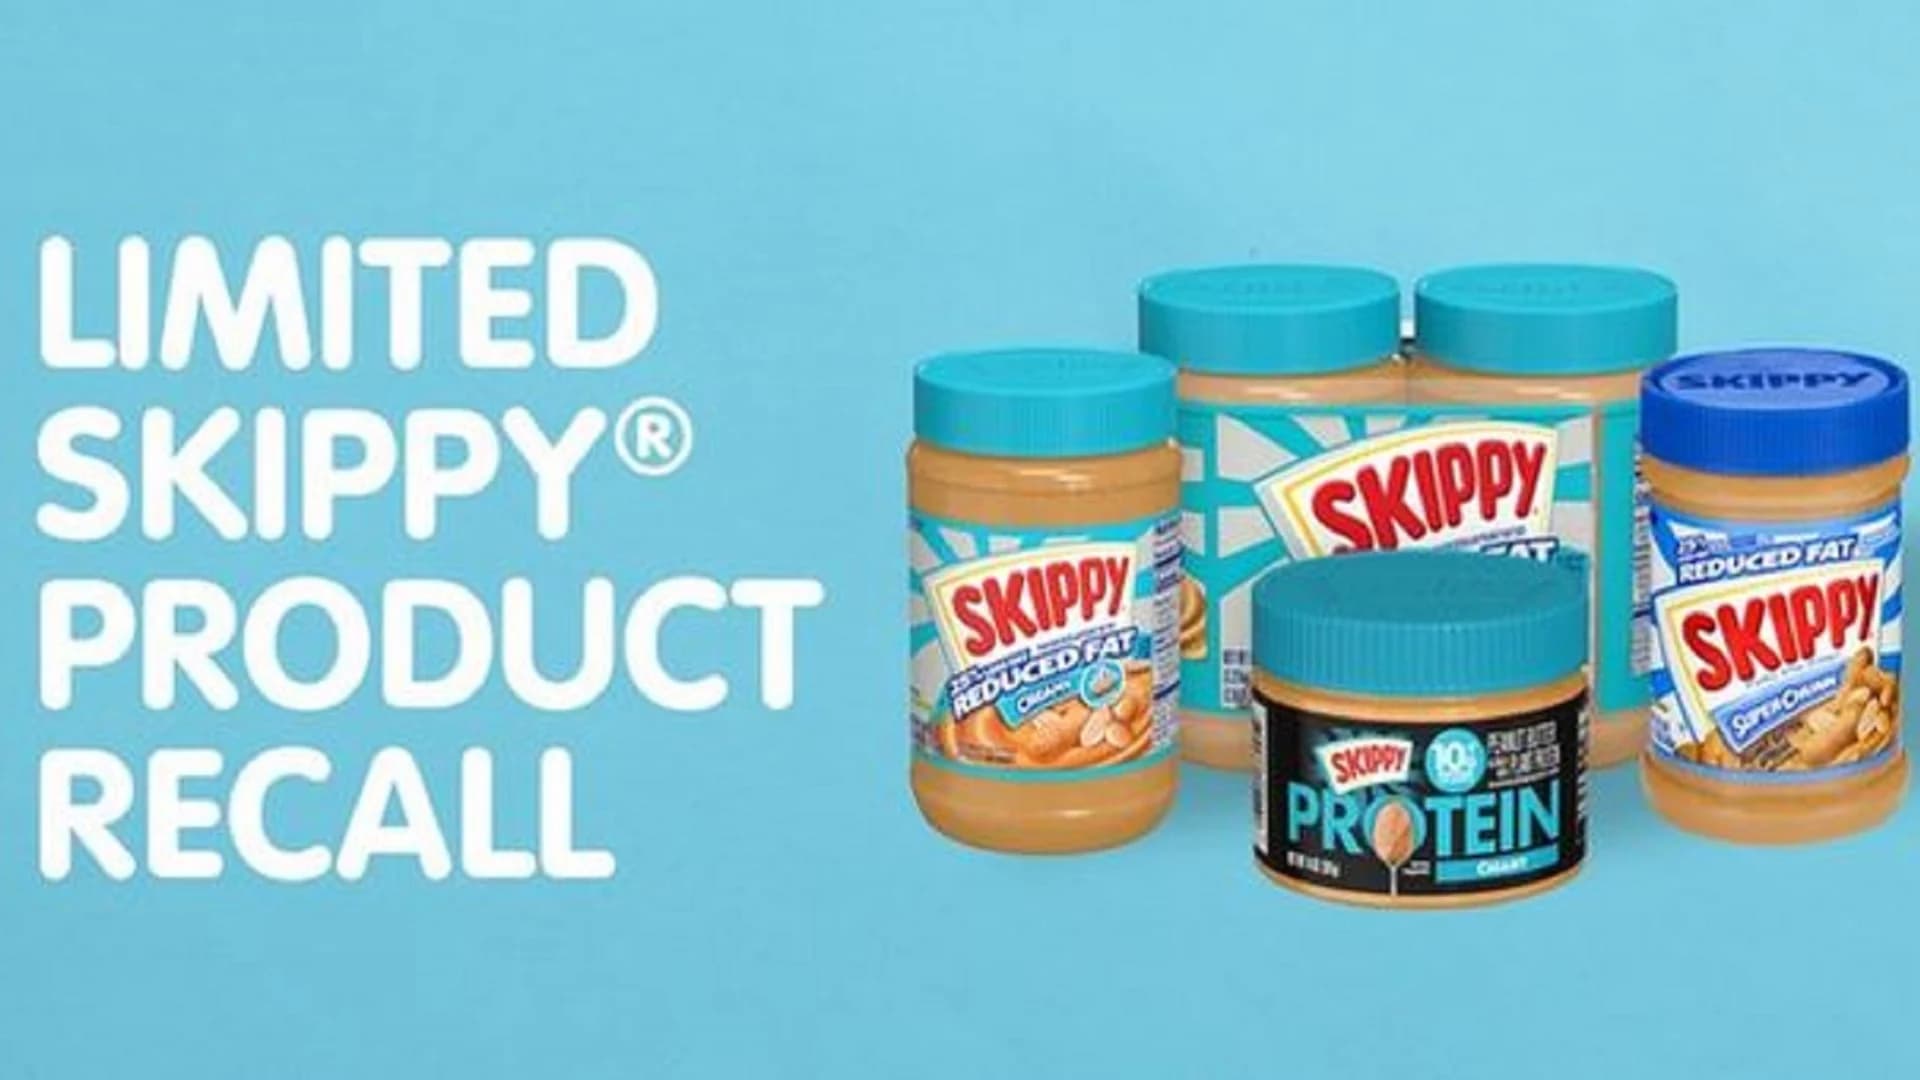 Skippy voluntarily recalls some peanut butter due to possible stainless steel inside jars